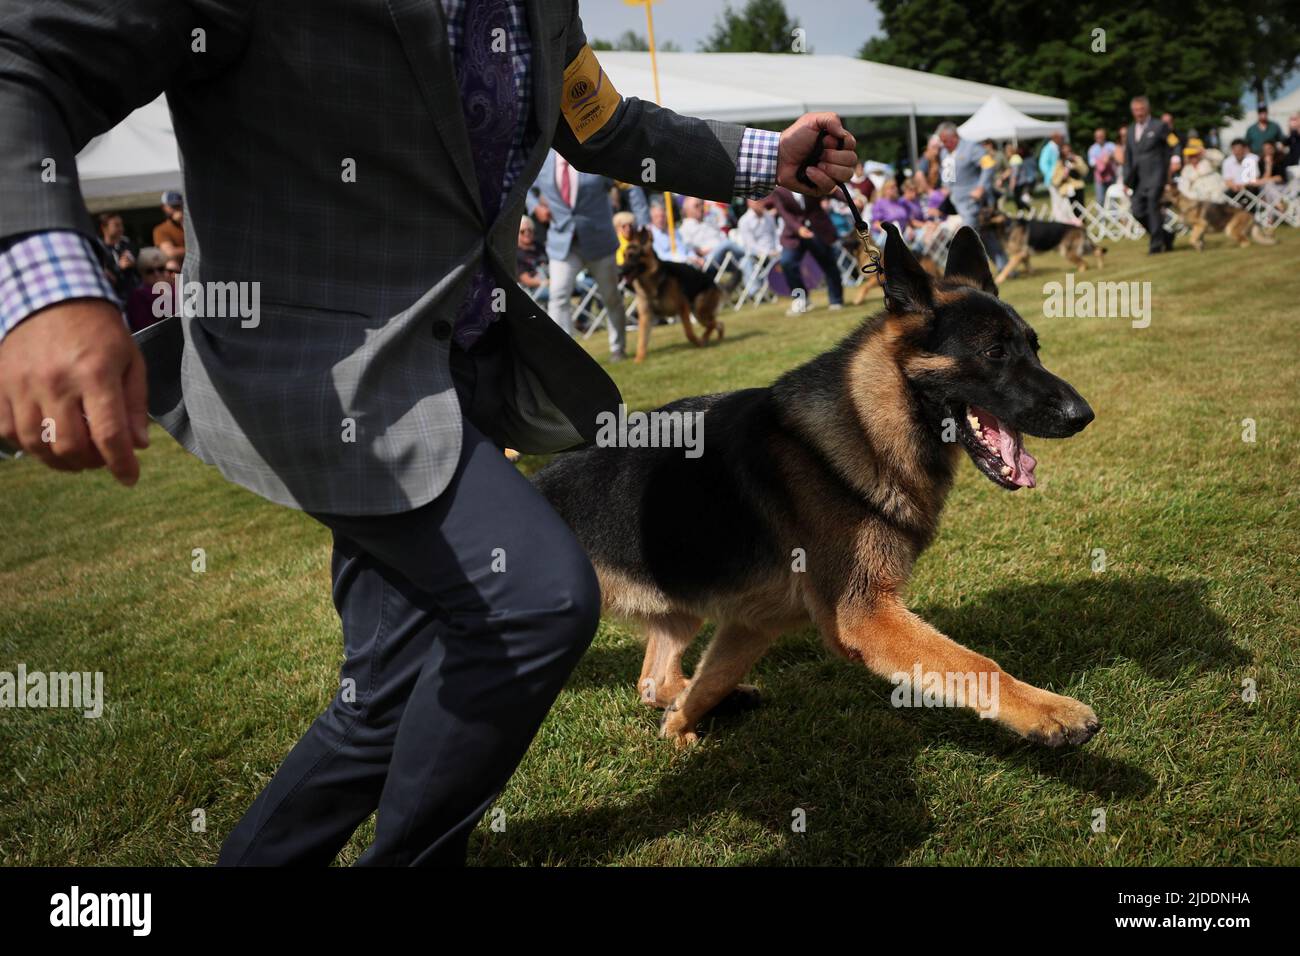 Handler Lenny Brown runs with River, a German Shepherd dog who won 'Best in Breed' during judging at the 146th Westminster Kennel Club Dog Show at the Lyndhurst Estate in Tarrytown, New York, U.S., June 20, 2022. REUTERS/Mike Segar Stock Photo